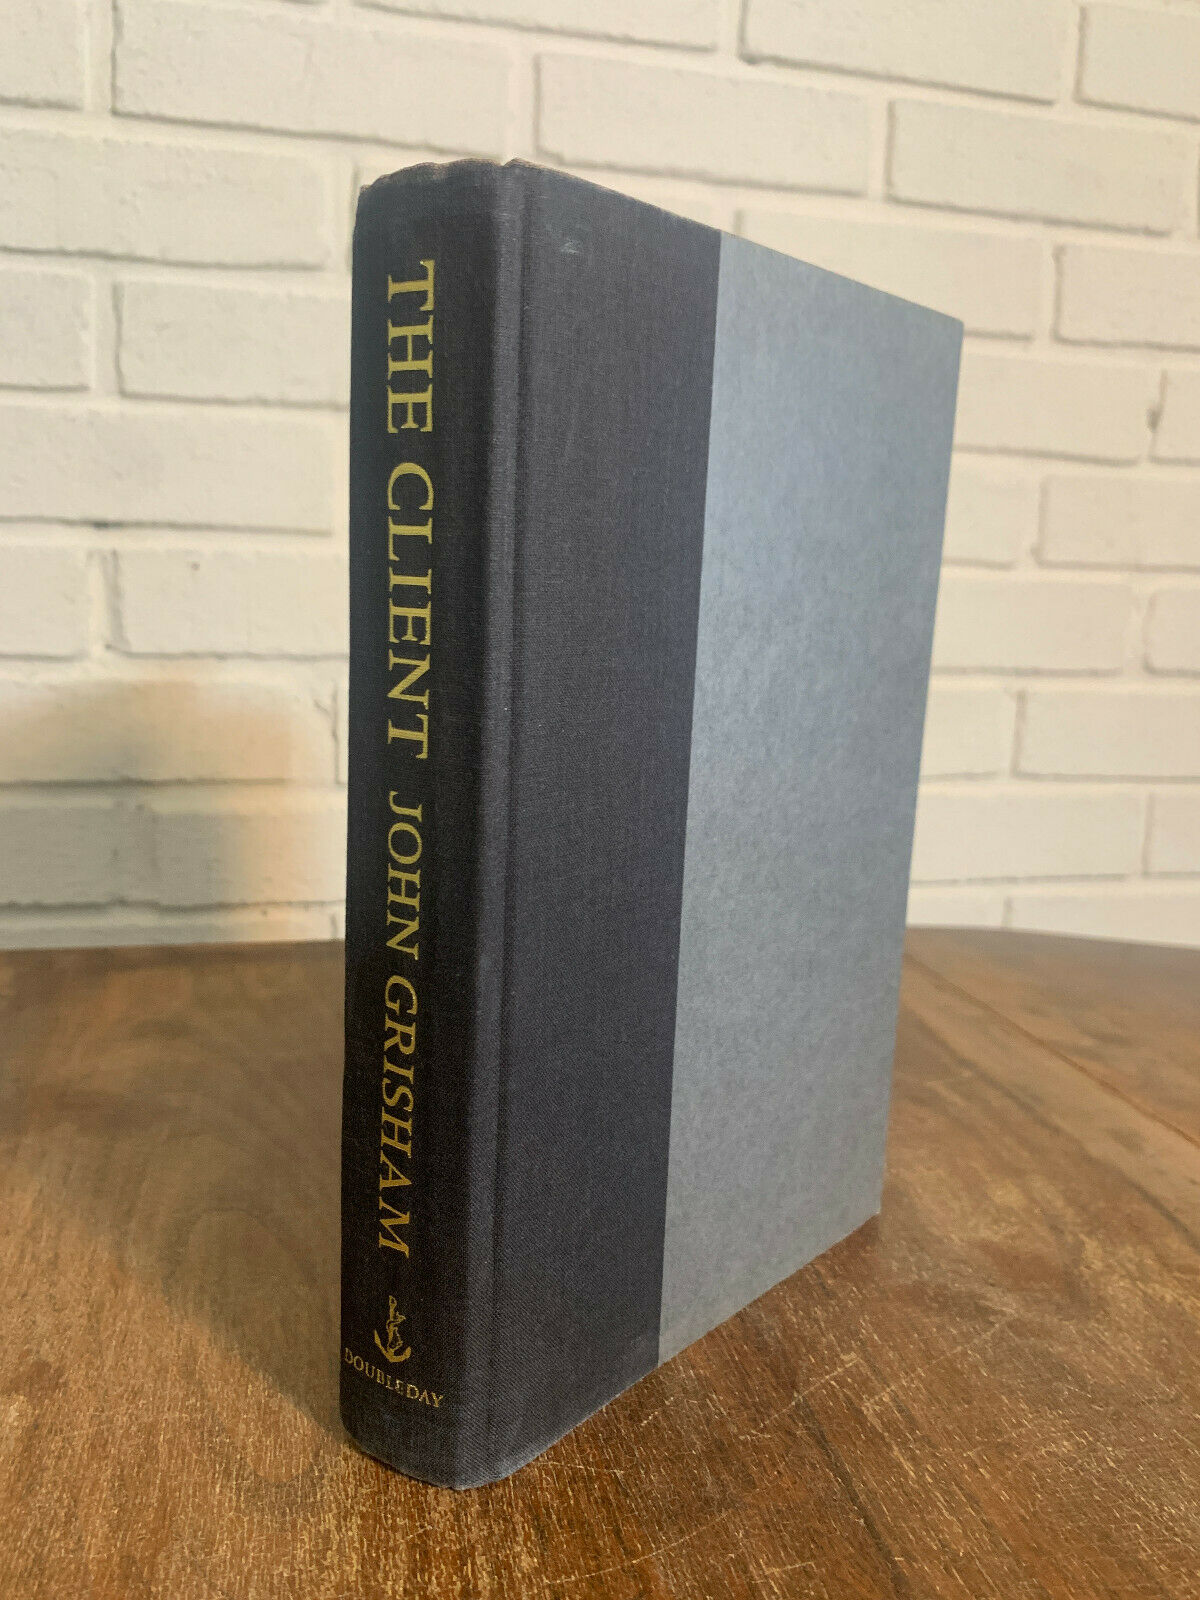 John Grisham, The Client & The Chamber t, 1st Edition 1st Printing (Z1)